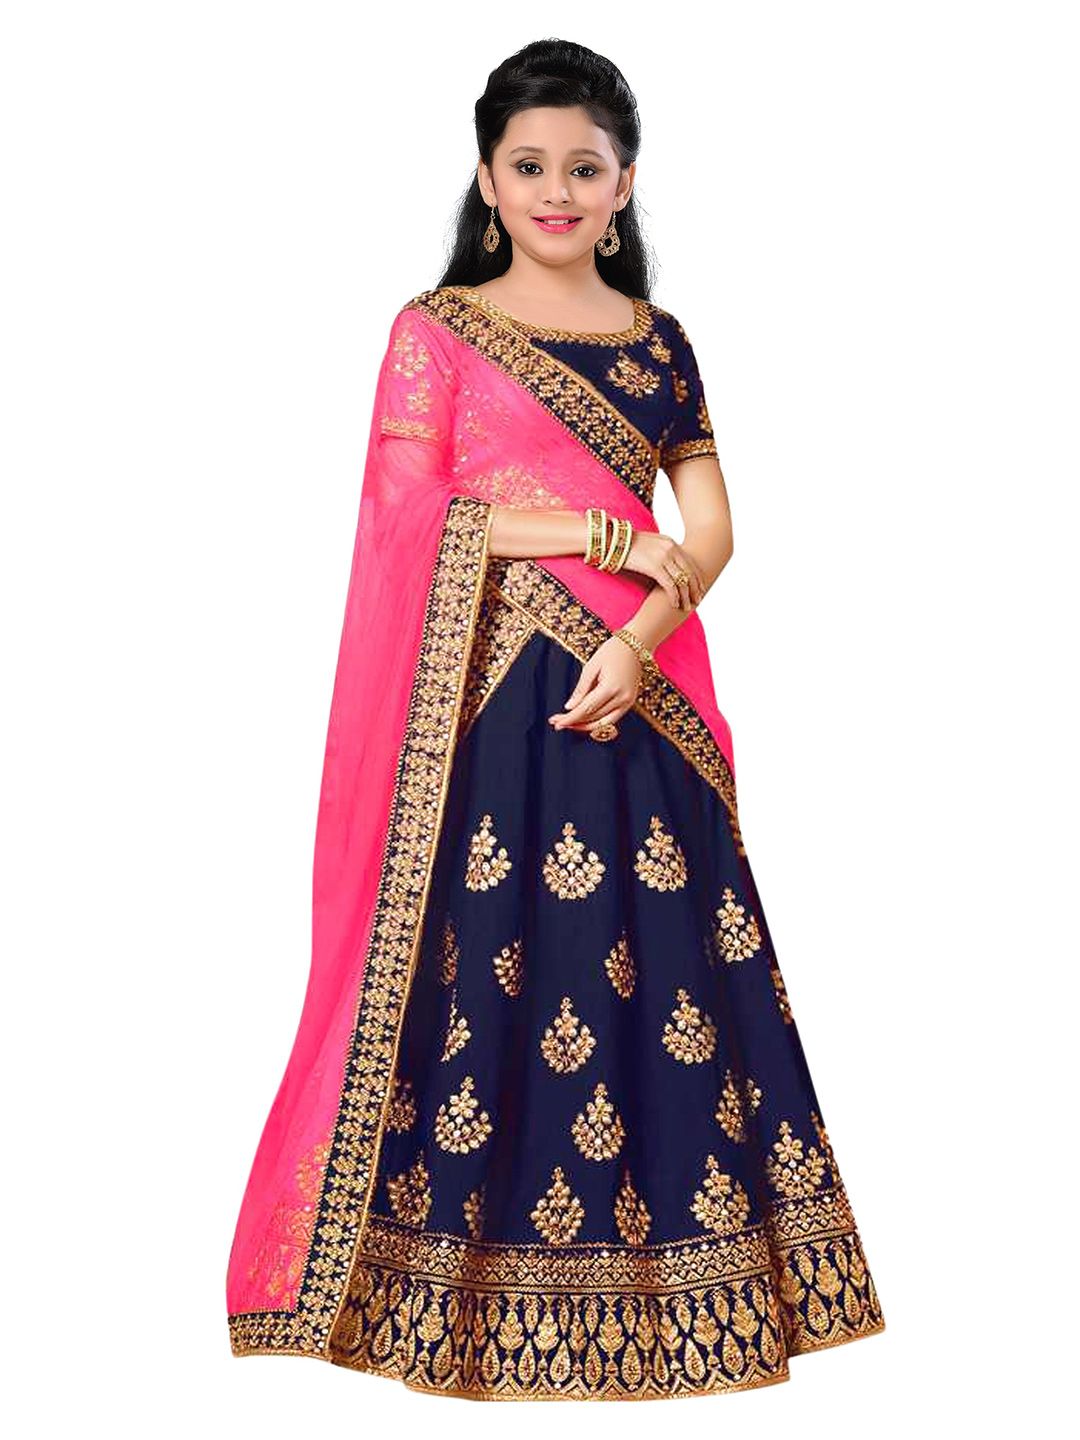 WTWC FAB Girls Blue Embroidered Semi-Stitched Lehenga & Unstitched Blouse With Dupatta Price in India